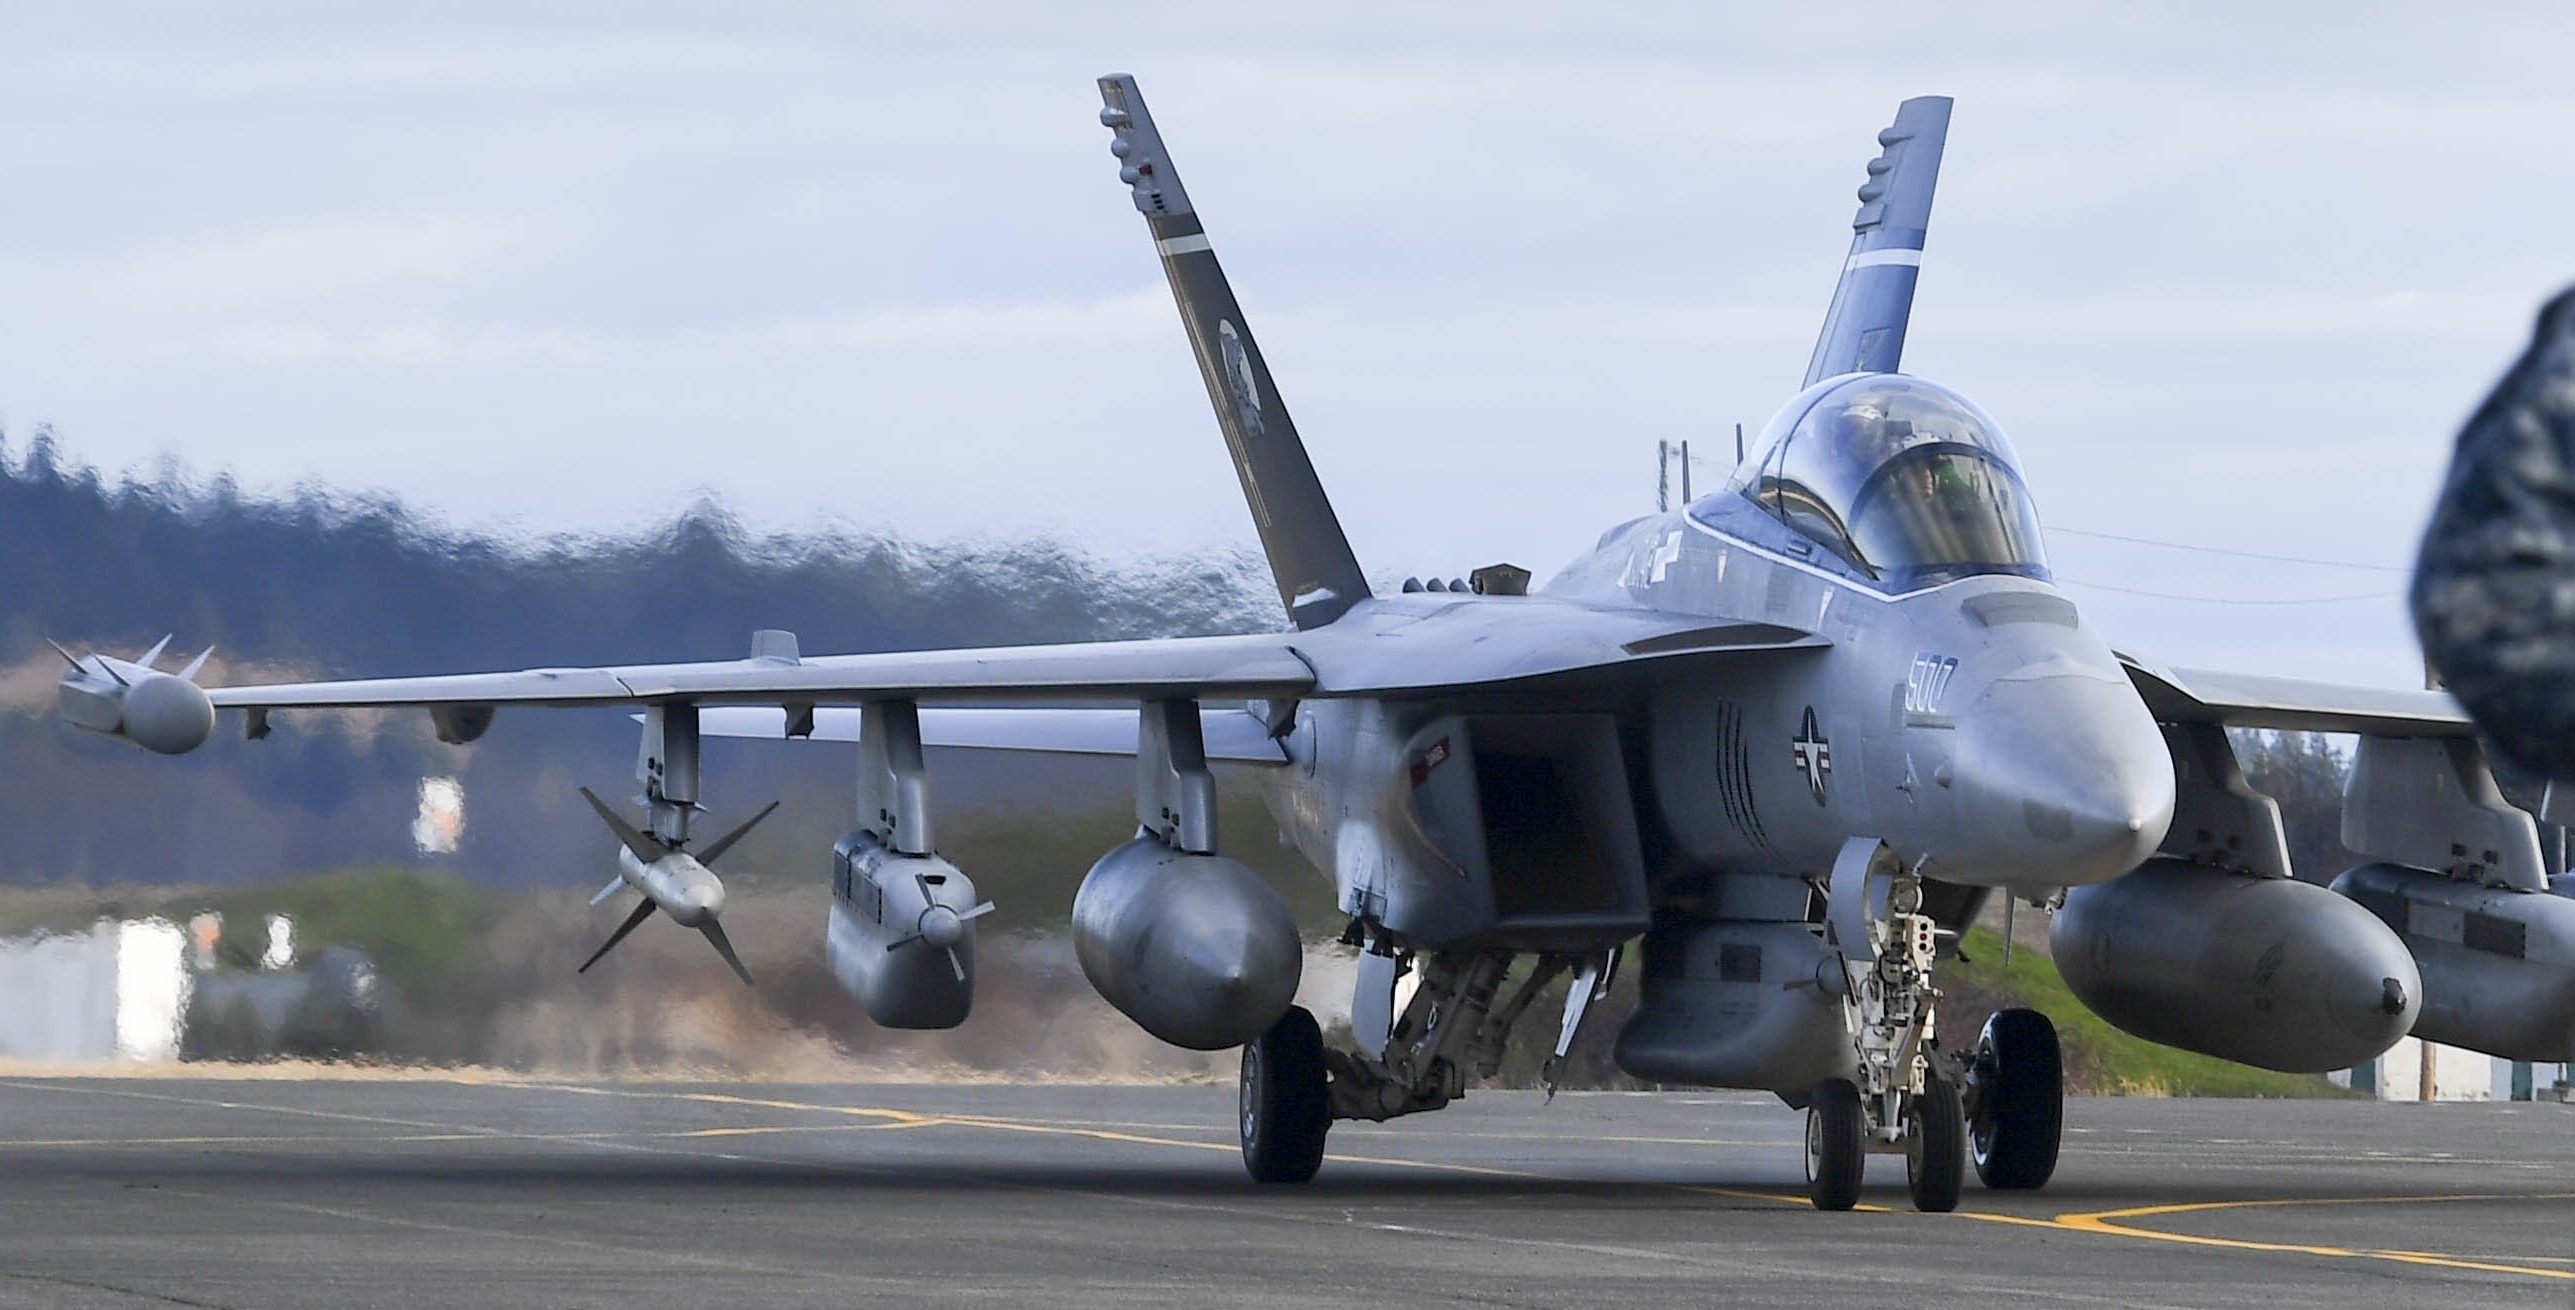 vaq-142 gray wolves electronic attack squadron ea-18g growler us navy cvw-11 nas whidbey island 101